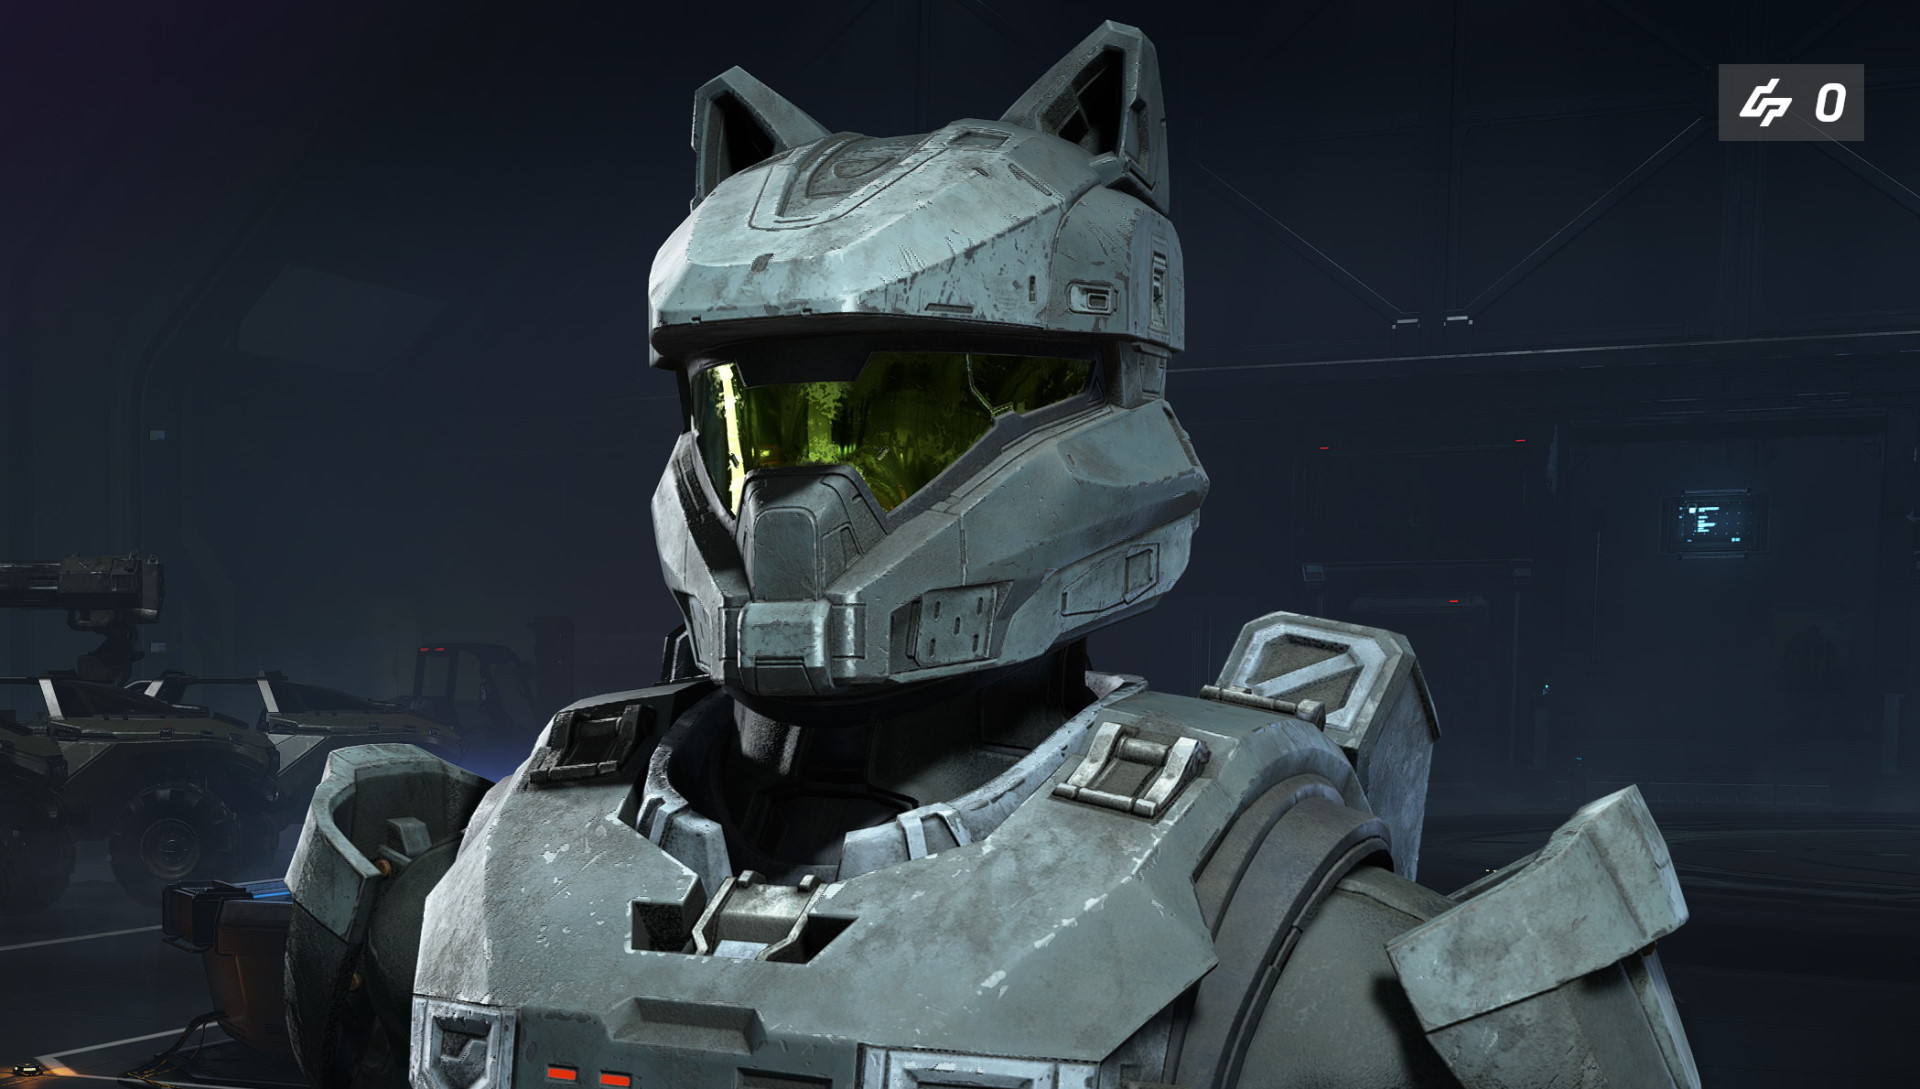  Halo Infinite's cosmetics are about to get cheaper 